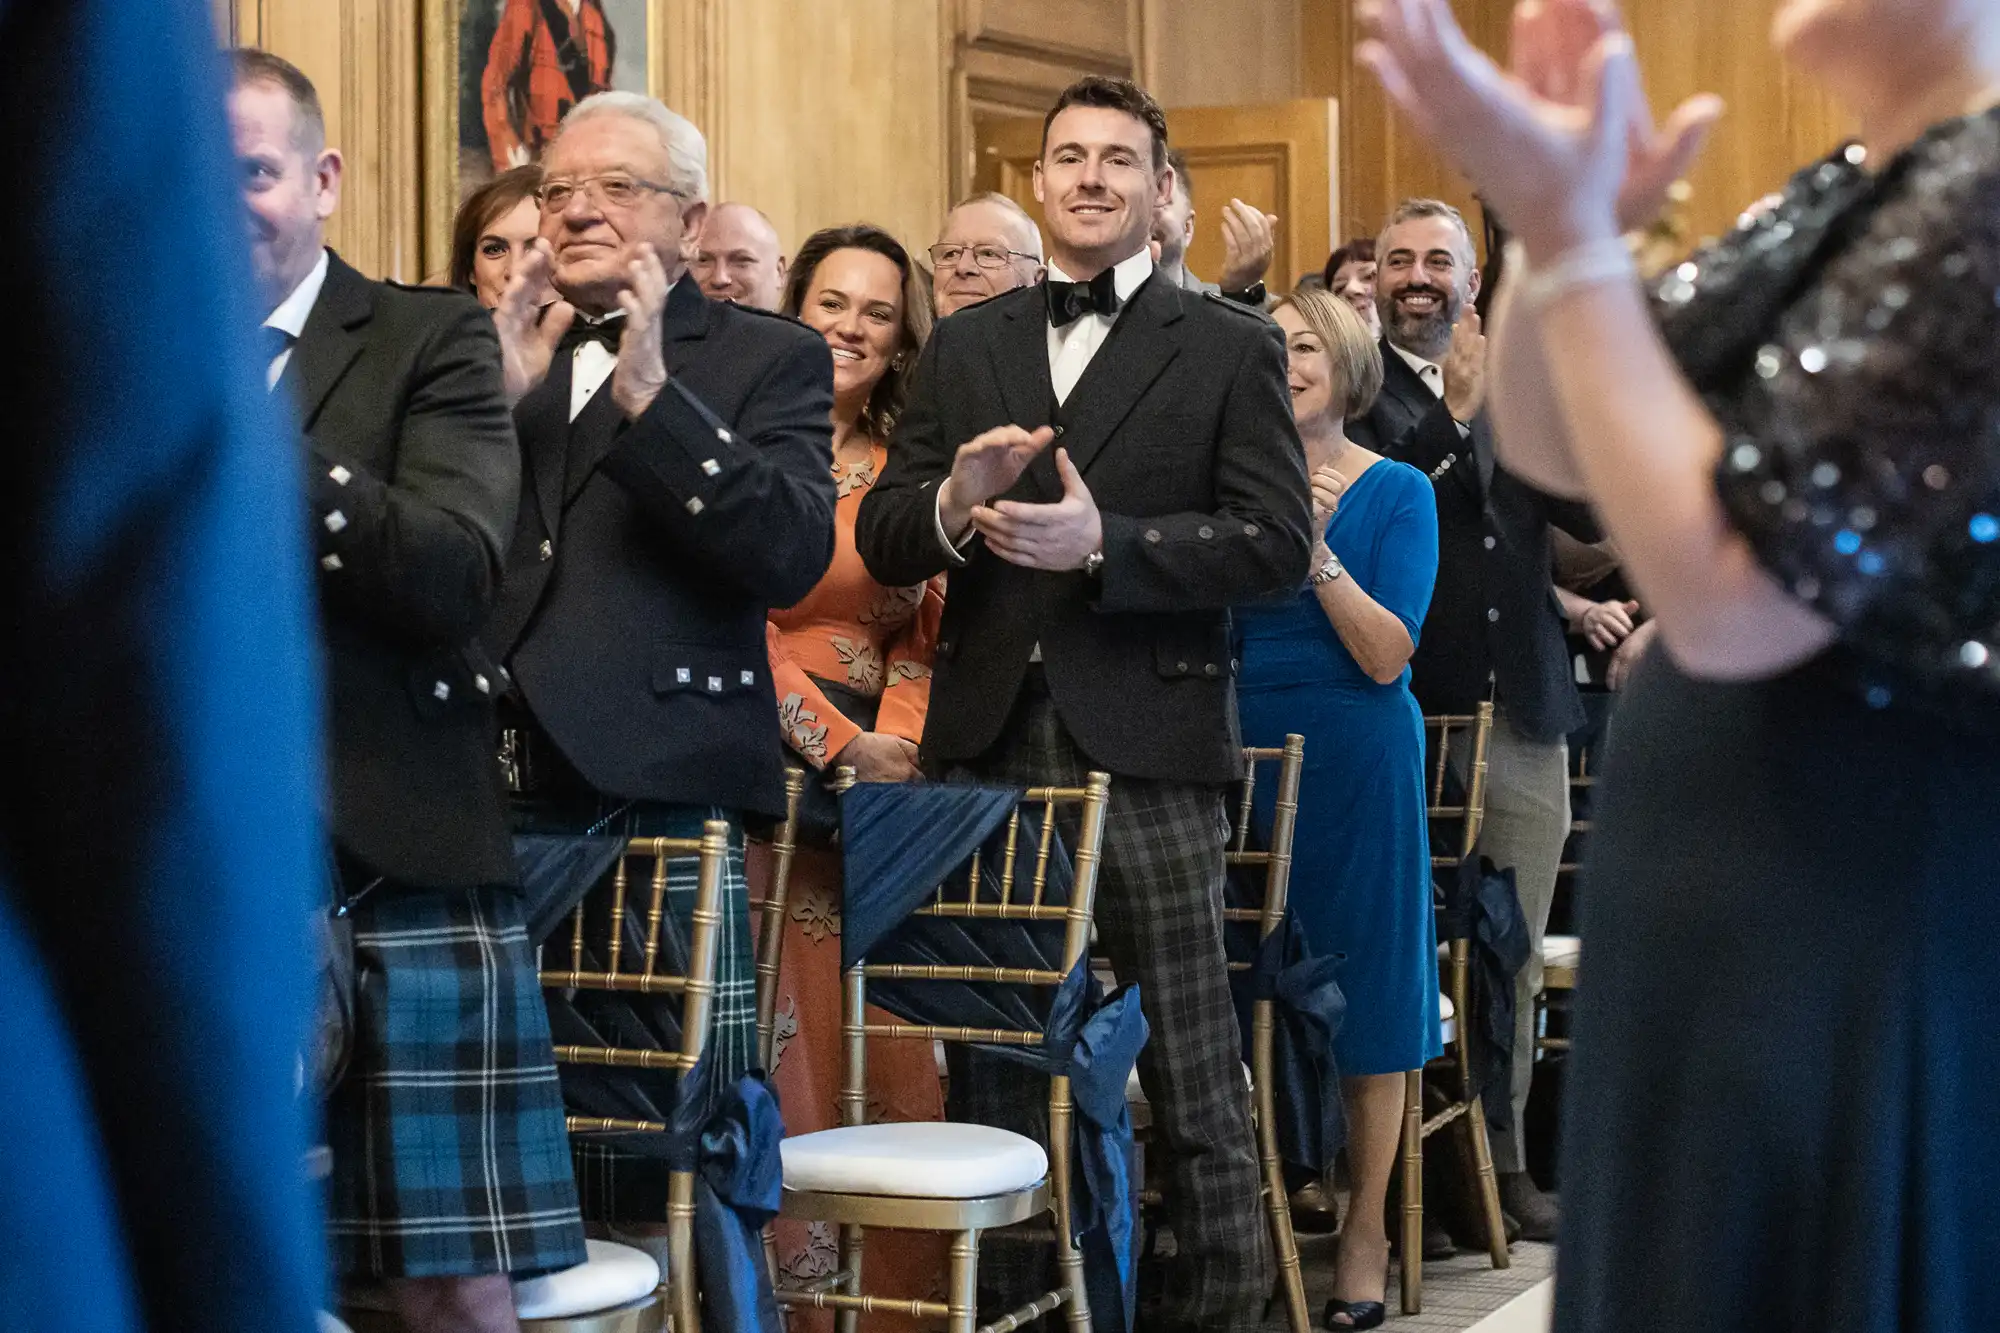 A group of people, some wearing formal attire and kilts, stand and clap in a warmly lit room with wooden walls and elegant chairs.